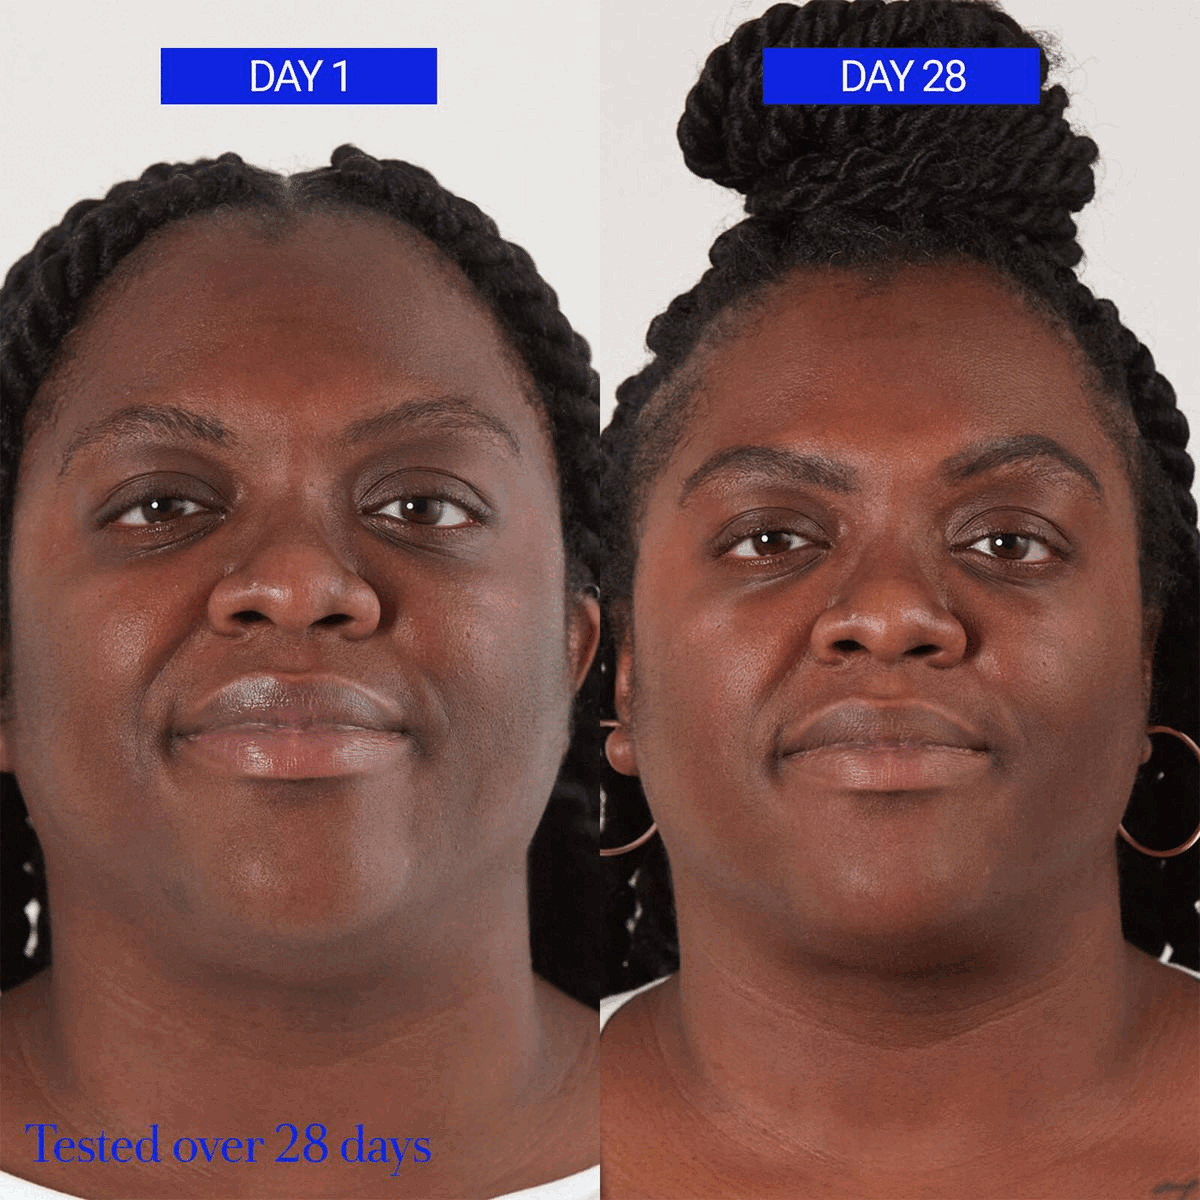 Image 1-3, before and after. Image 4, consumer results.